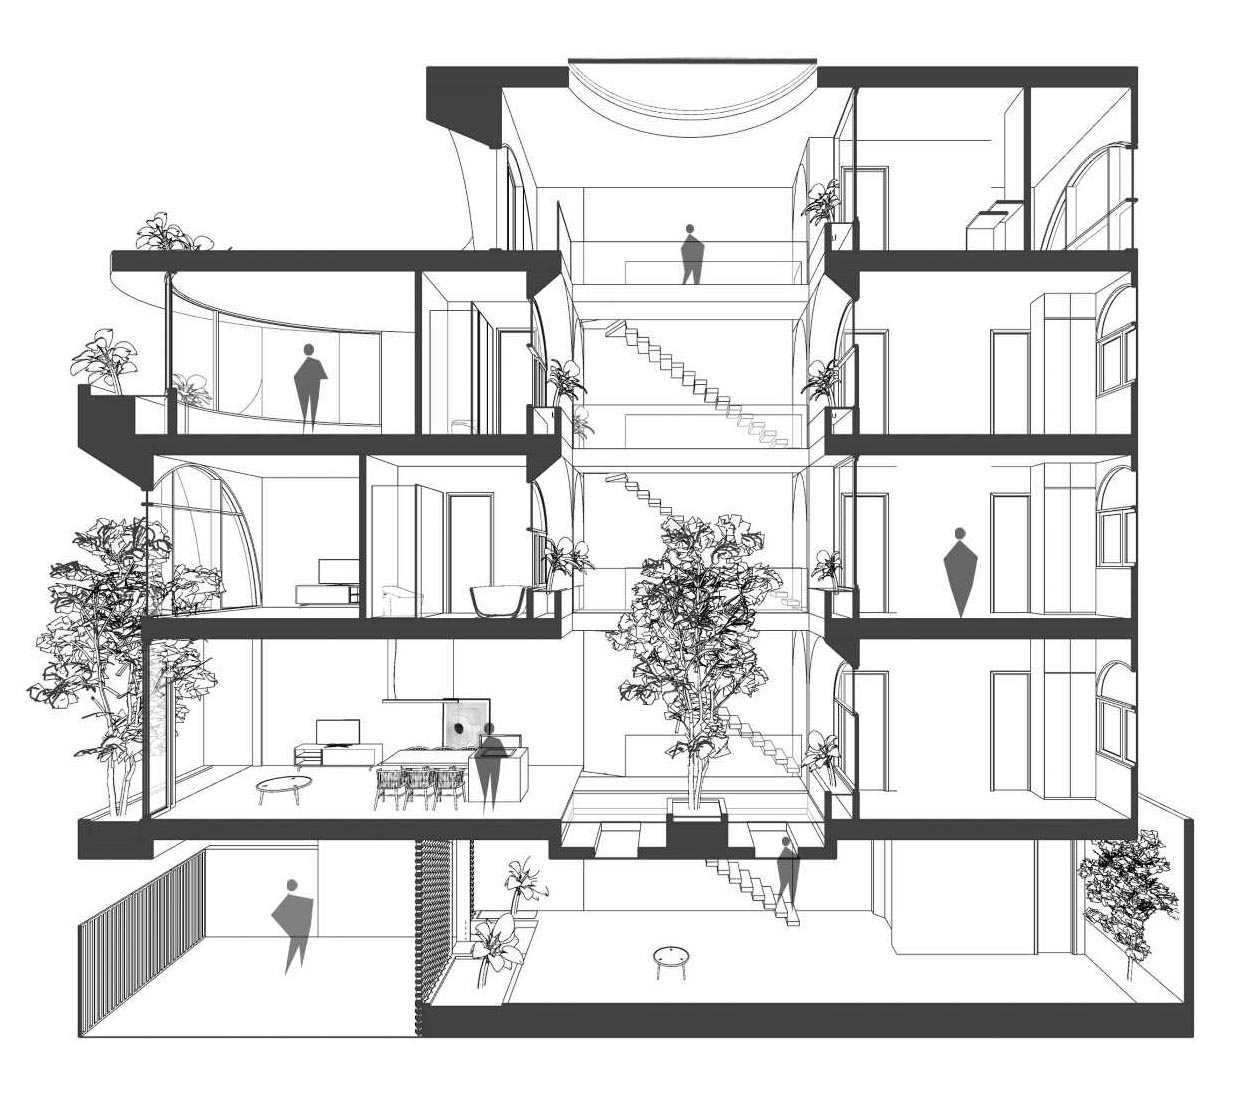 The perspective sections of a multi-storey house.